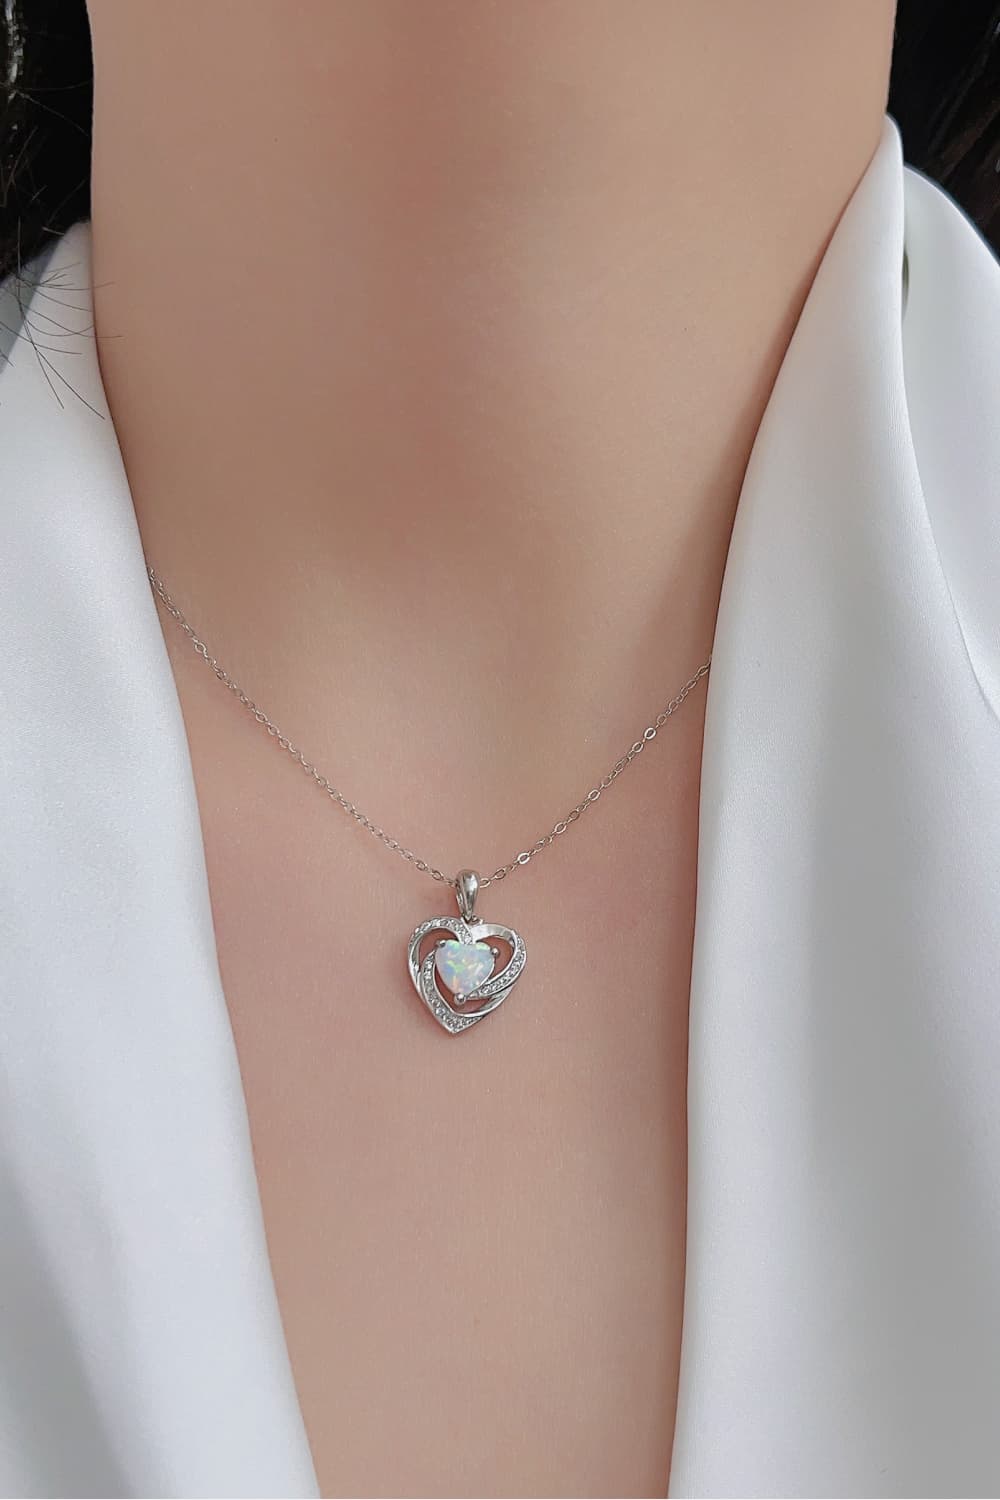 Opal Heart Pendant Necklace - Necklaces - FITGGINS